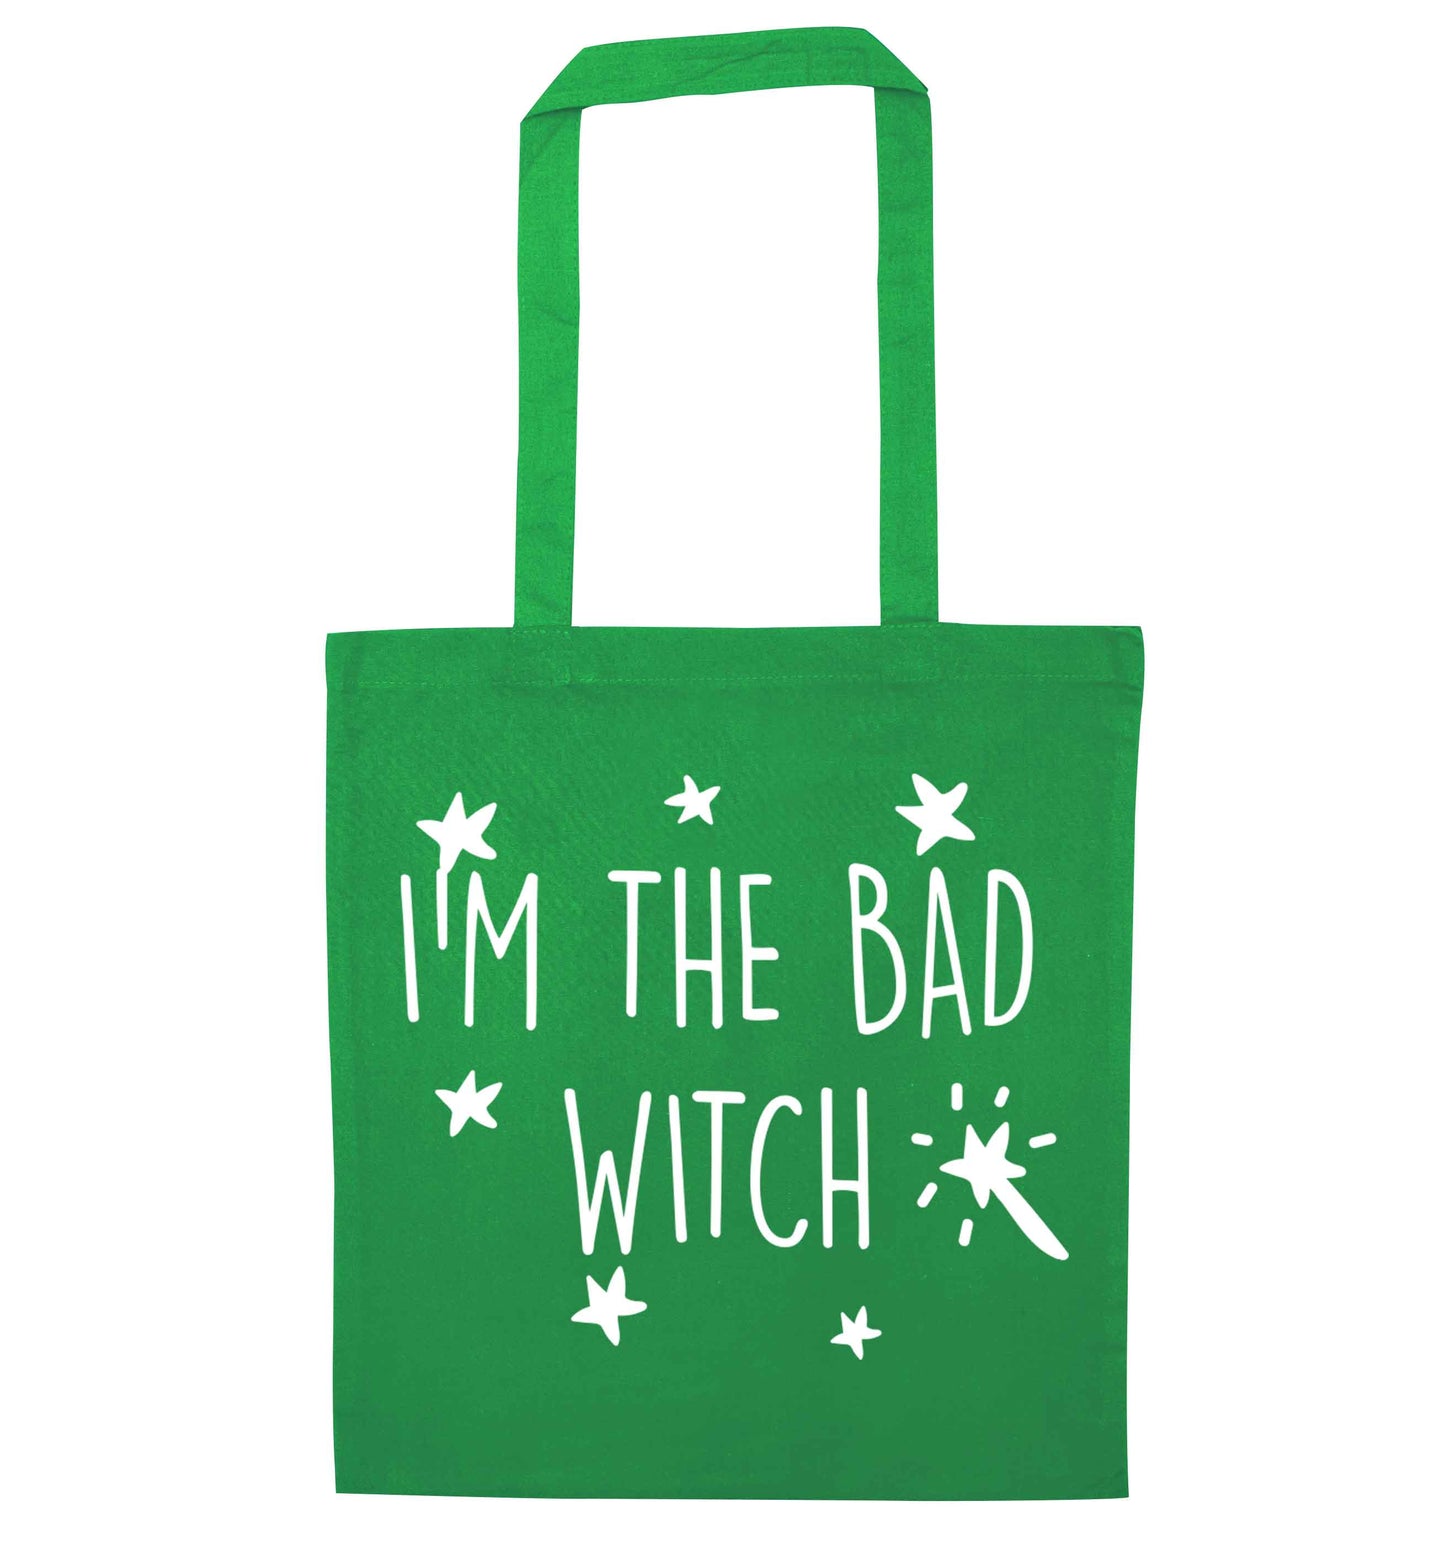 Bad witch green tote bag